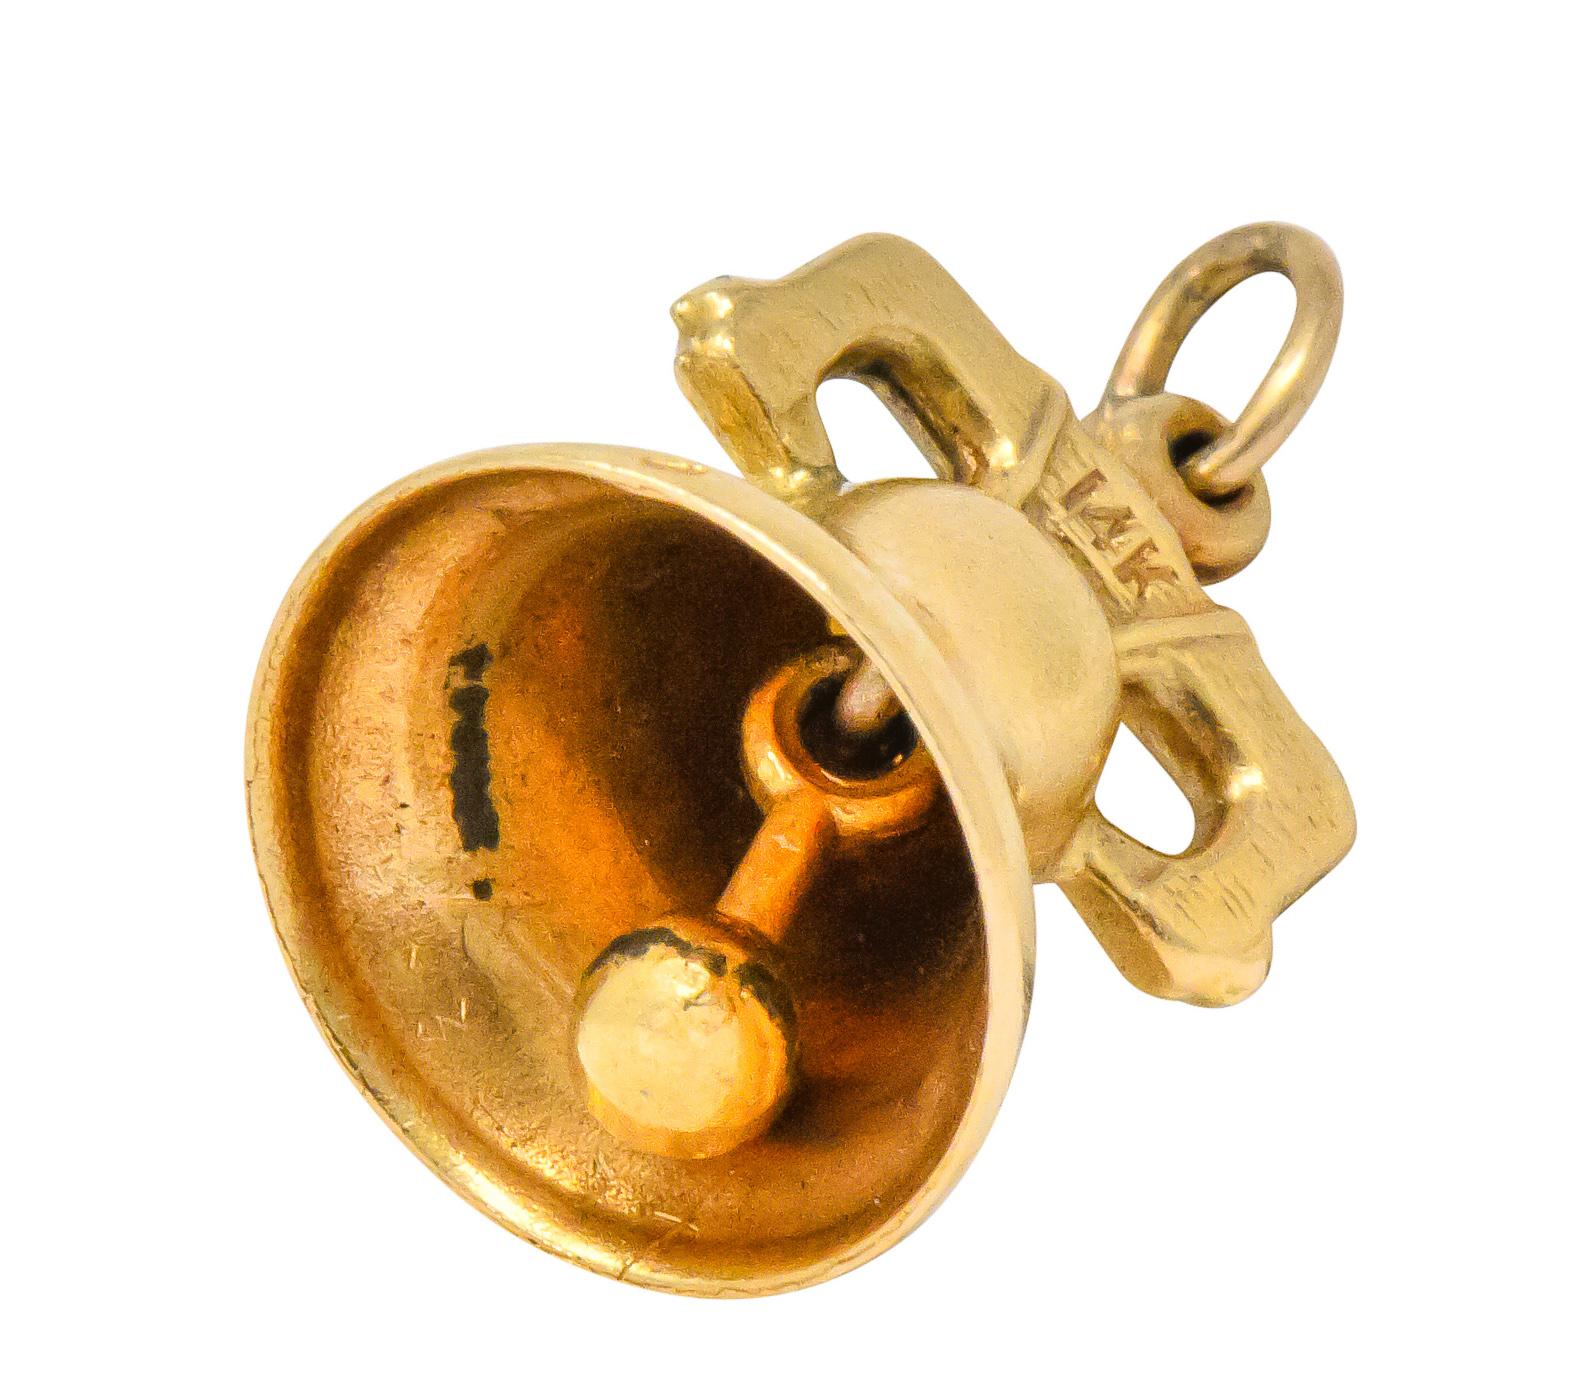 Liberty Bell charm with engraved crack detail and textured yoke frame

With articulated clapper creating a delicate ring

Stamped 14k for 14 karat gold

Circa 1910

Measures: approx. 1/2 x 3/4 (including bale) inch

Total weight: 1.9